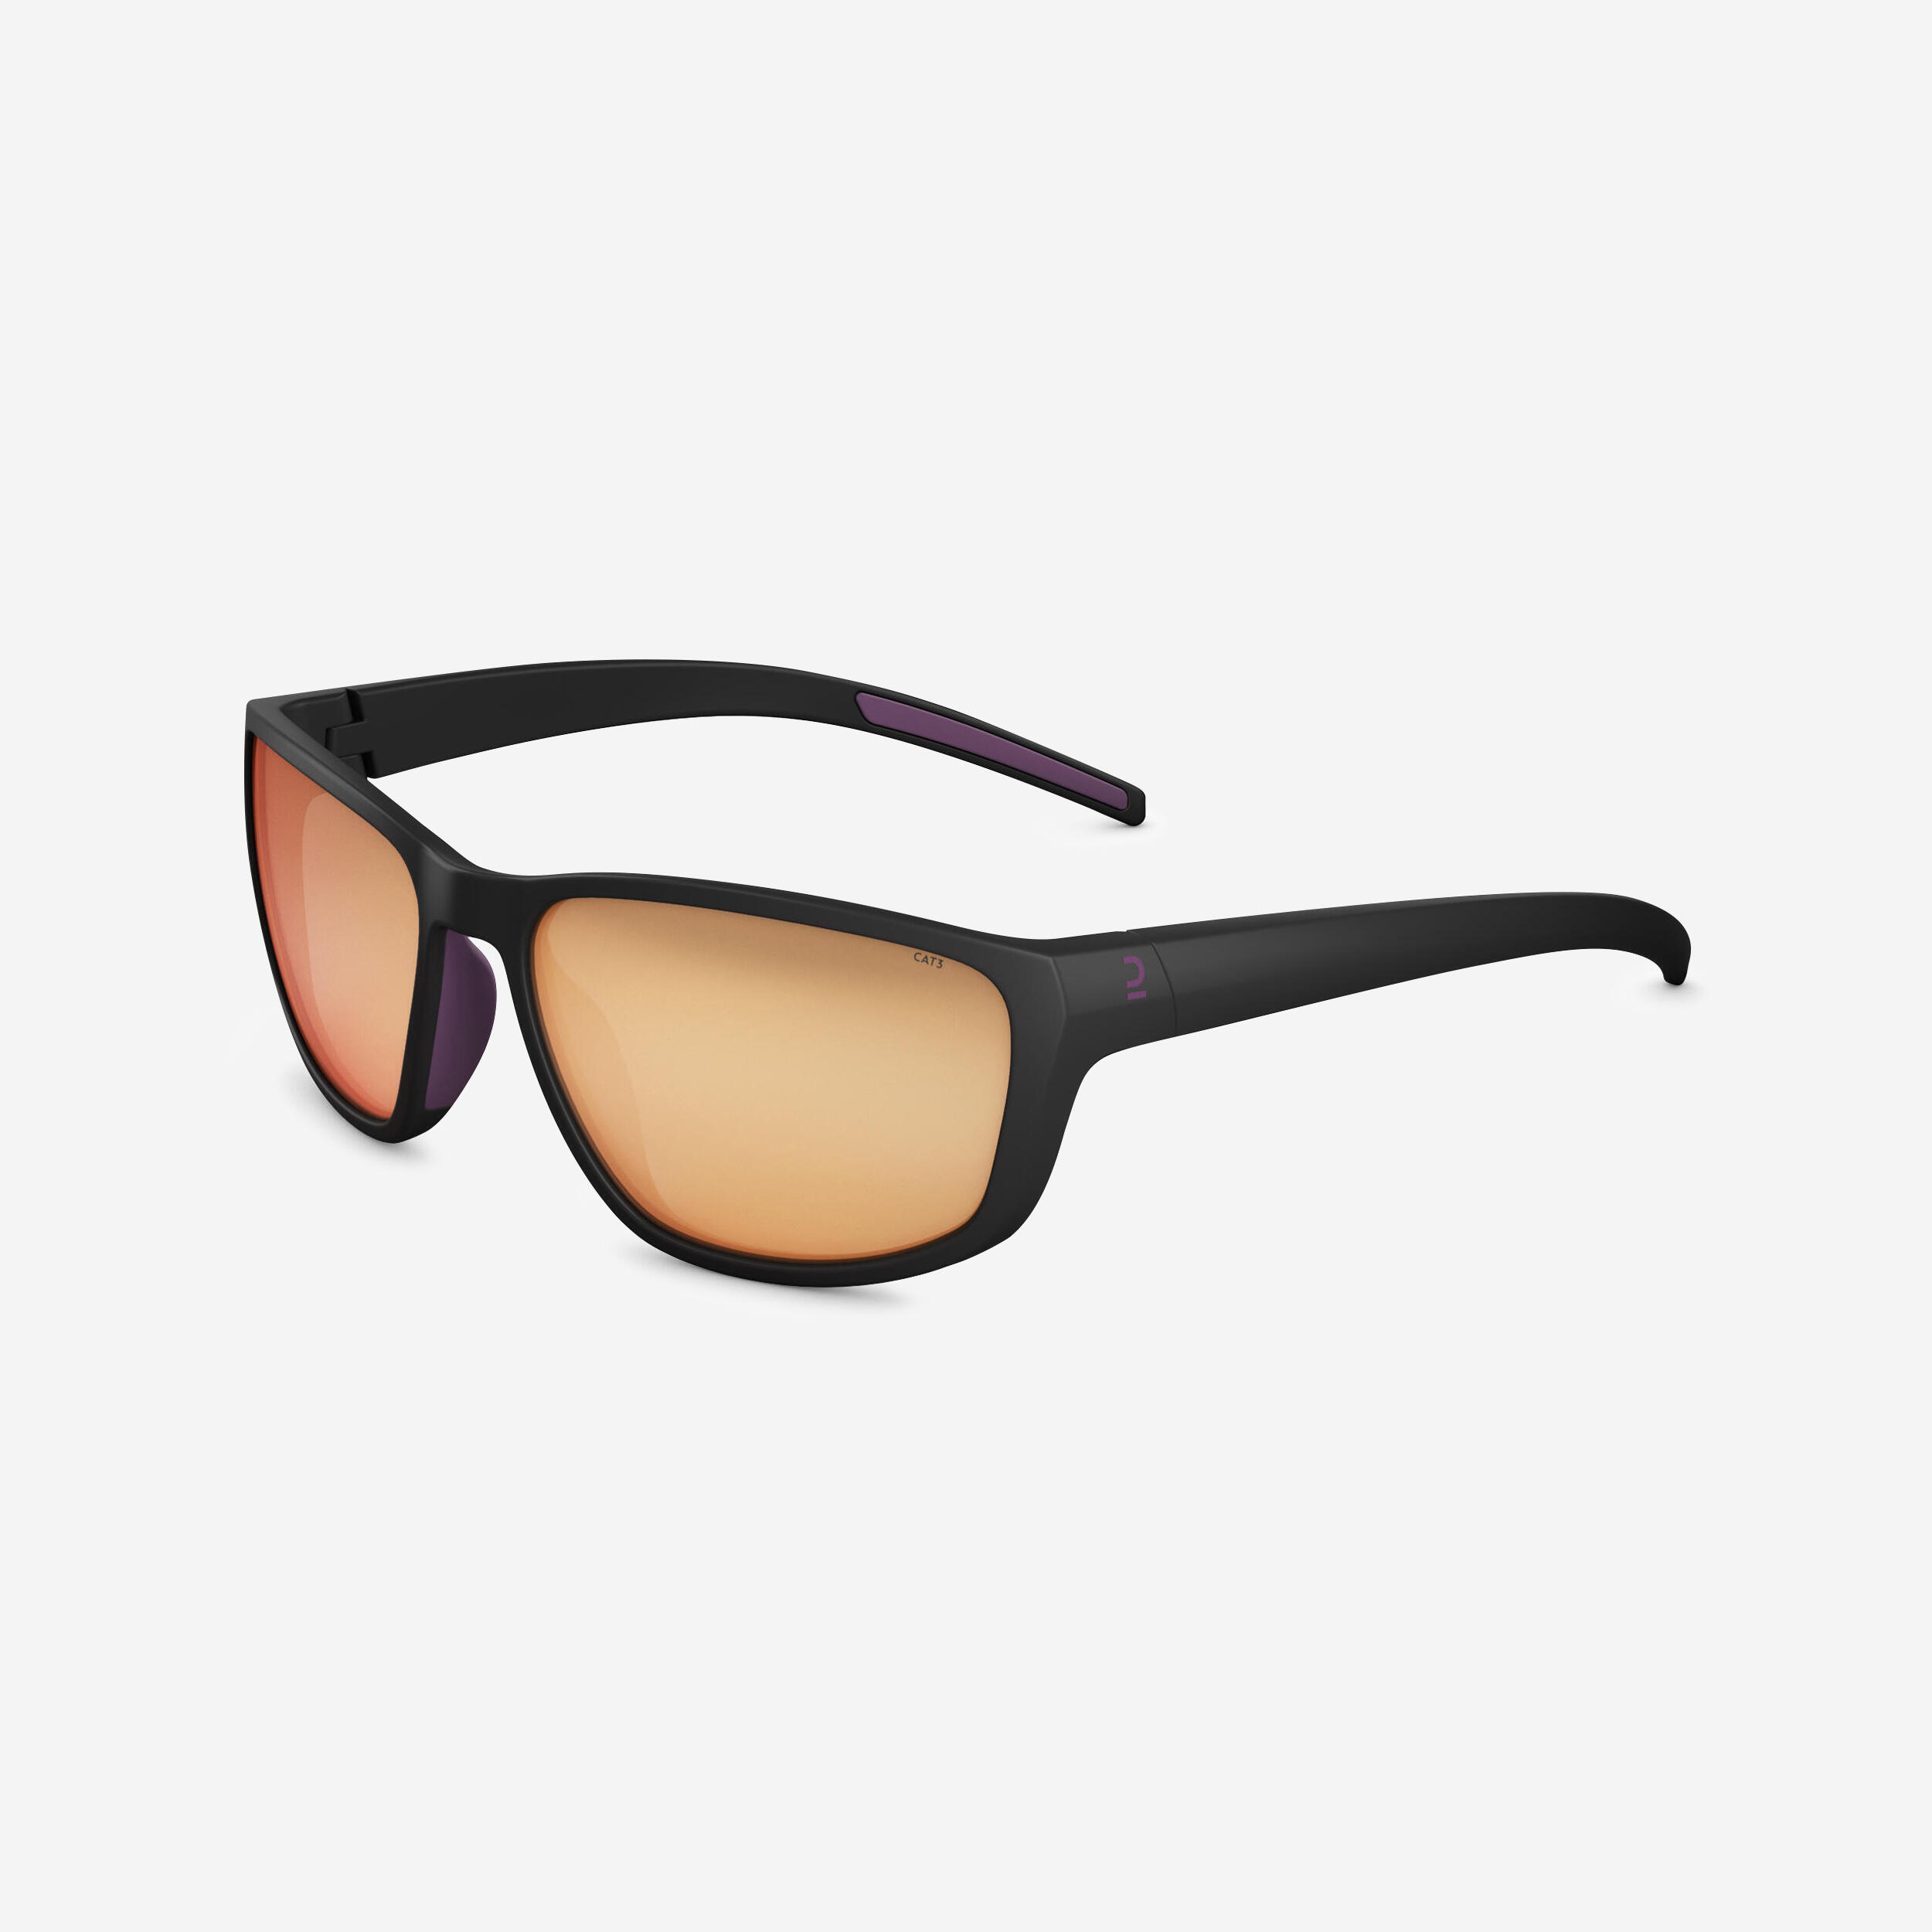 Image of MH 550 category 3 hiking sunglasses - Women